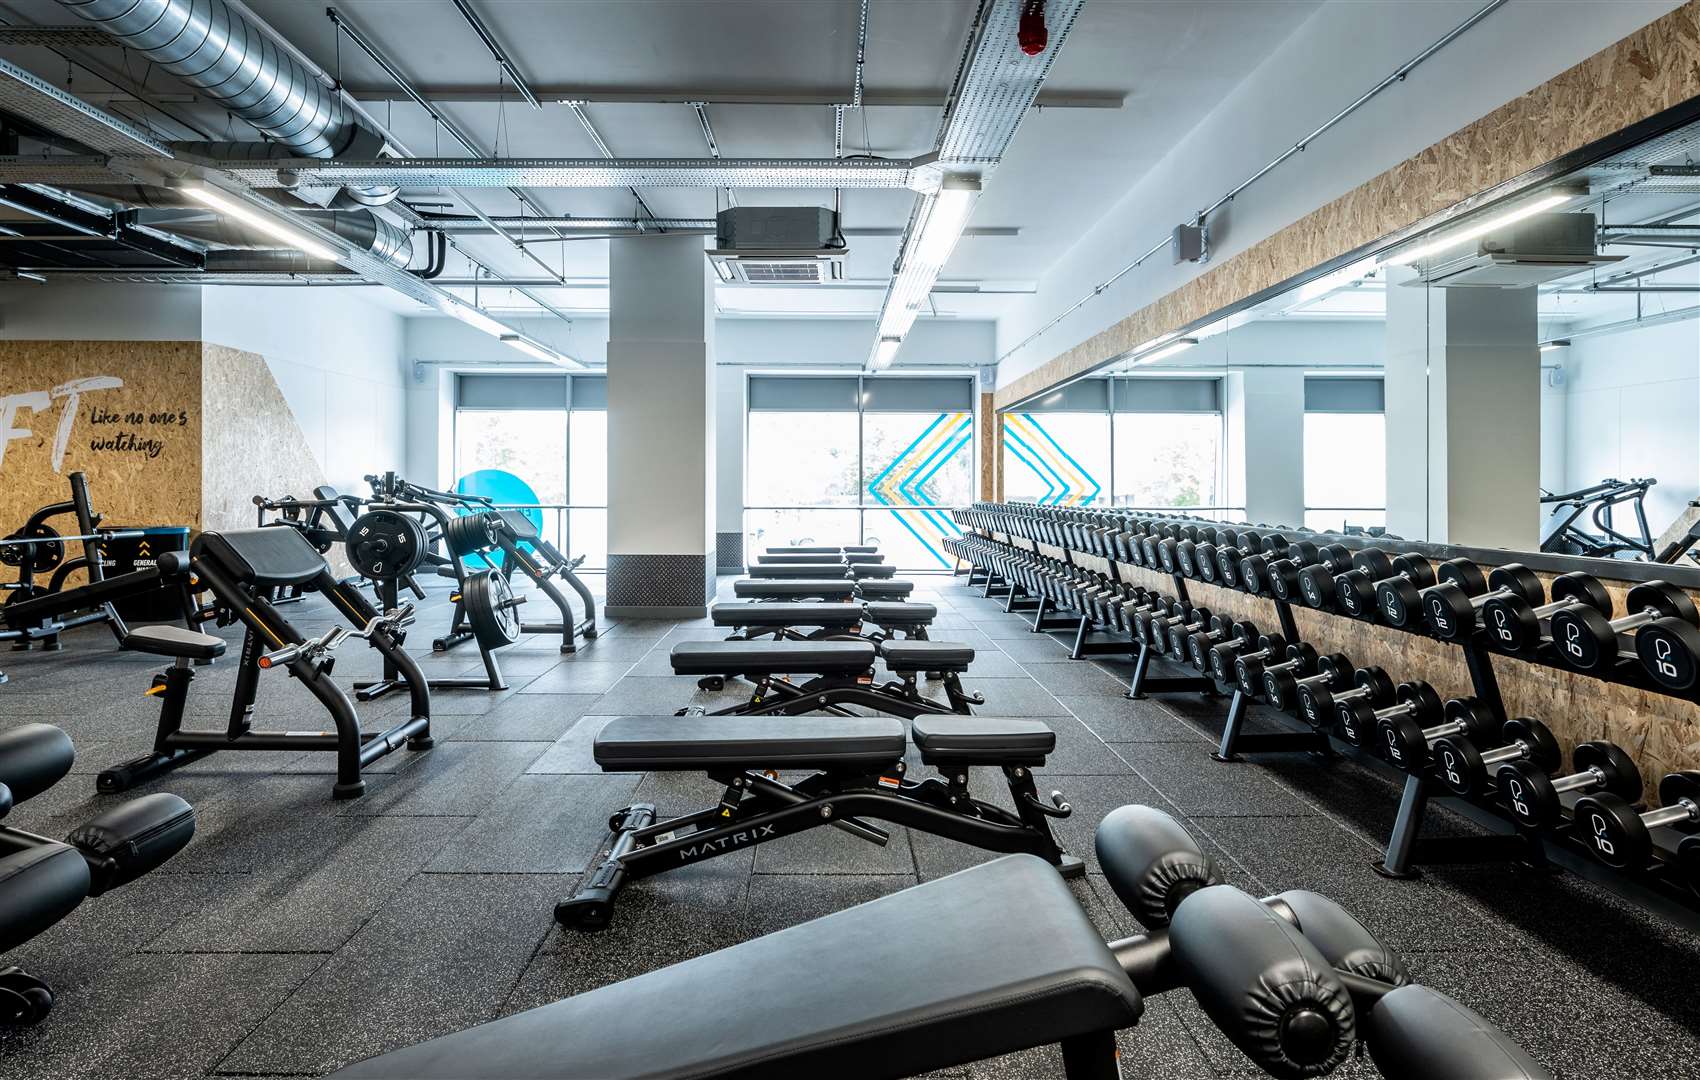 PureGym already has 13 branches in Kent. Pictured here is the inside of a branch in Stevenage which will look similar to the new Swanley one.